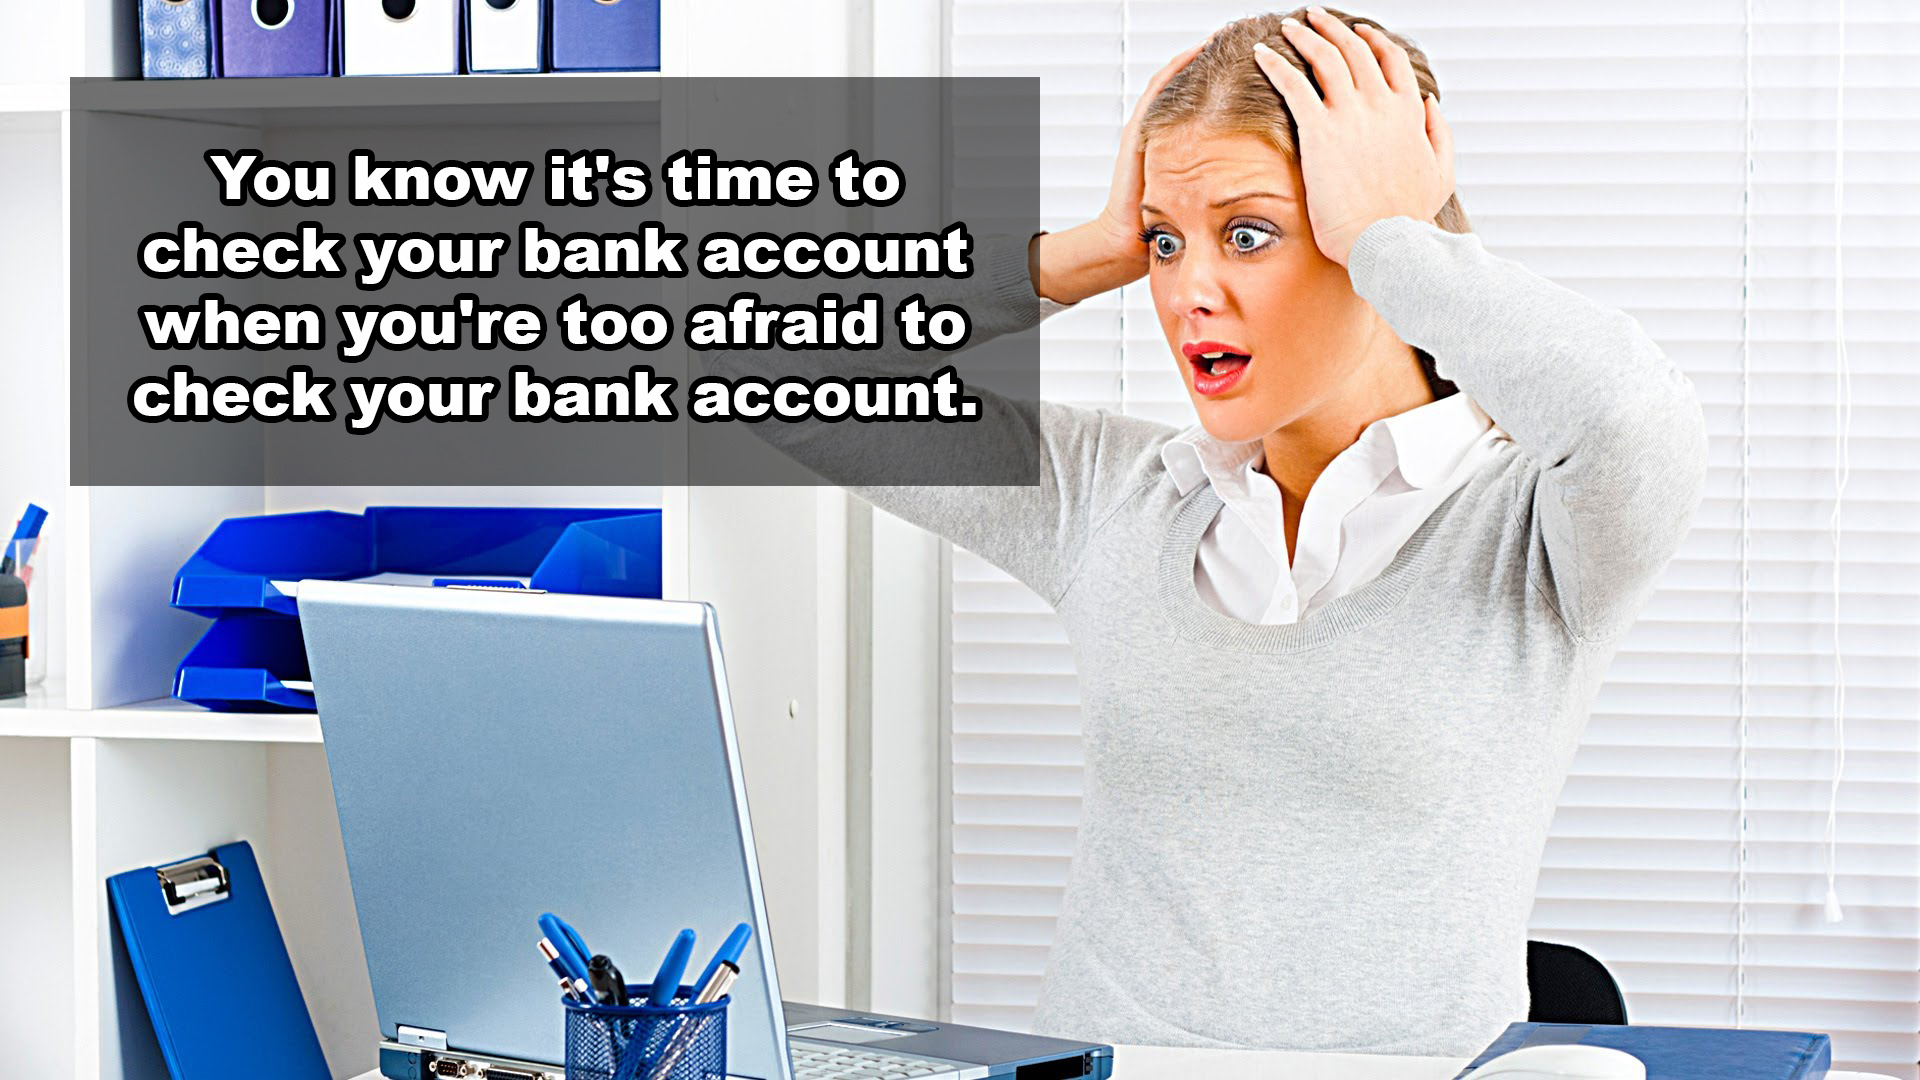 Clear Solutions Technology - You know it's time to check your bank account when you're too afraid to check your bank account.